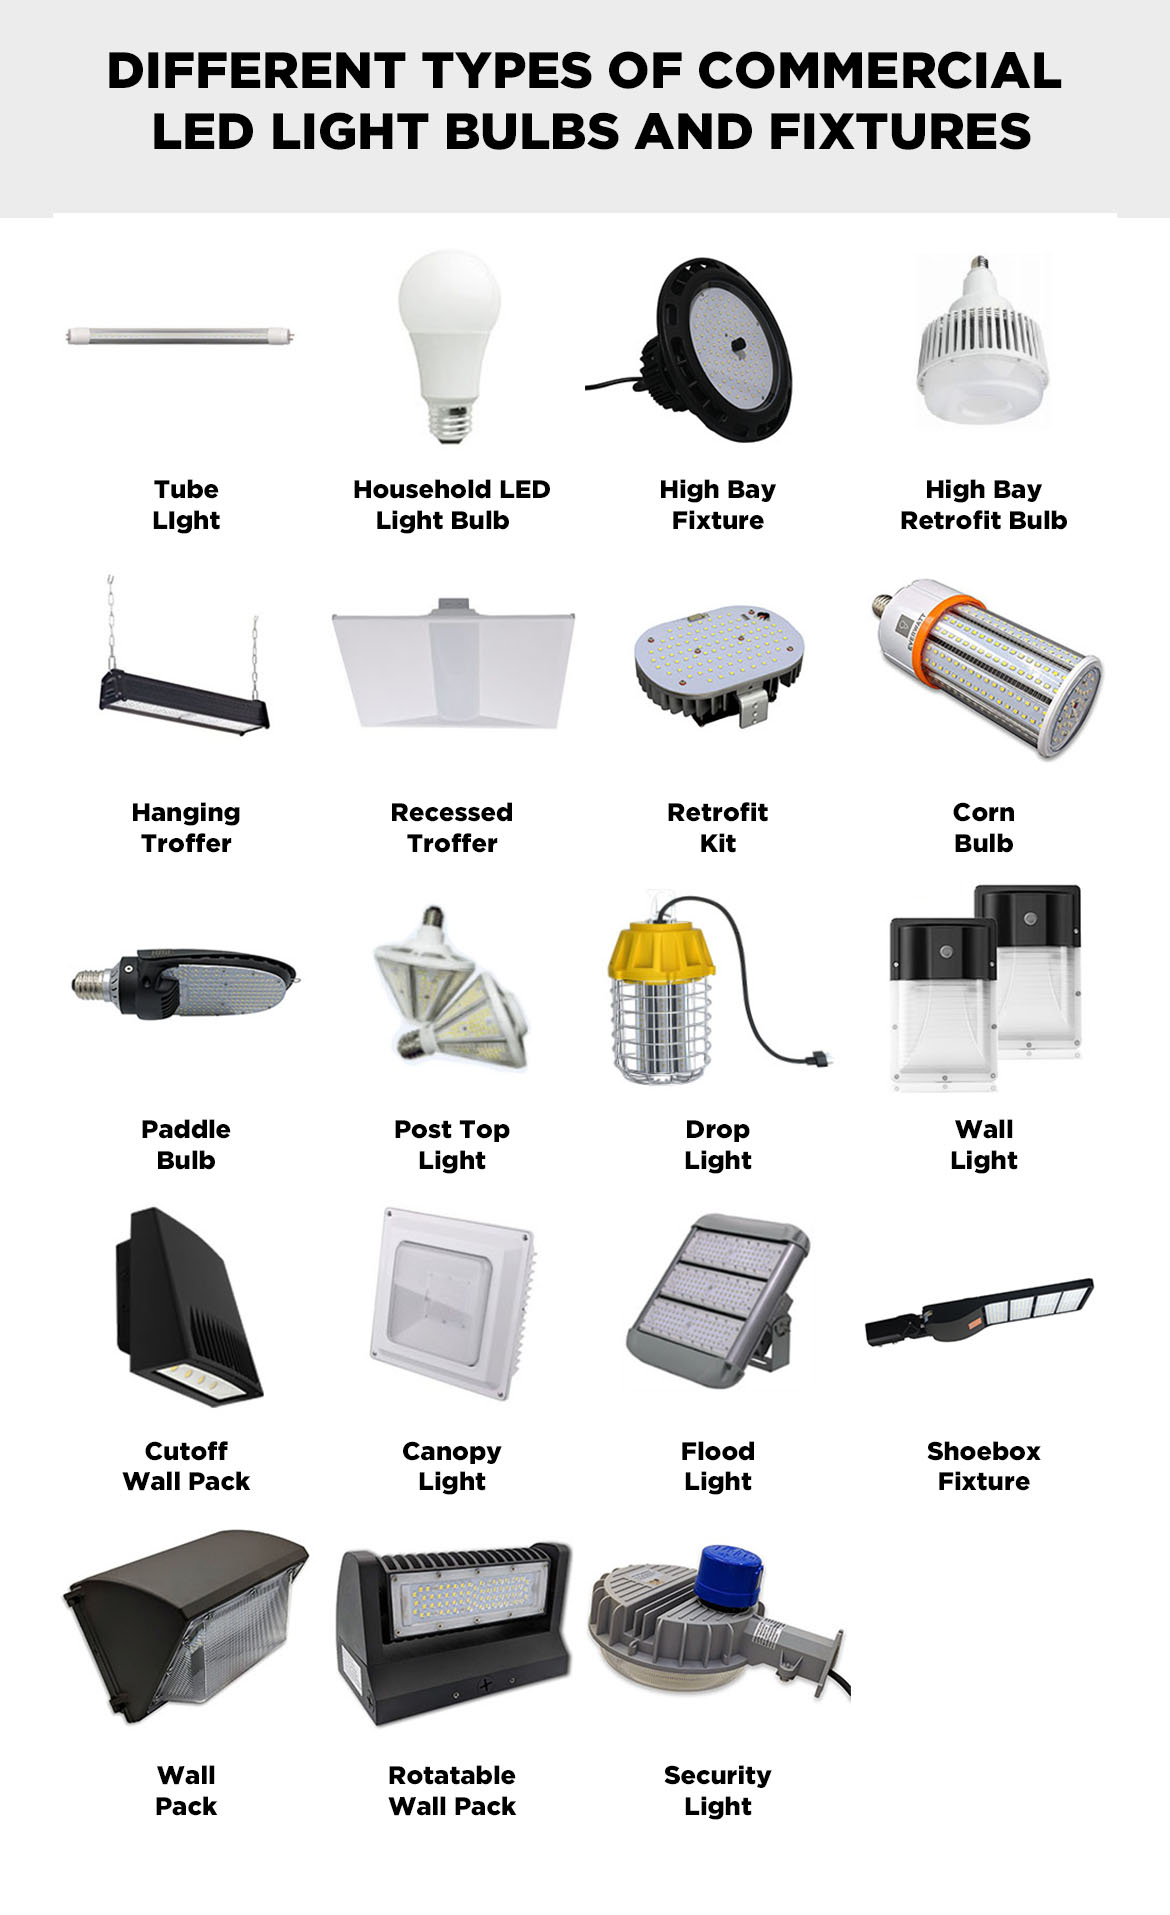 Different types of commercial LED bulbs and fixtures